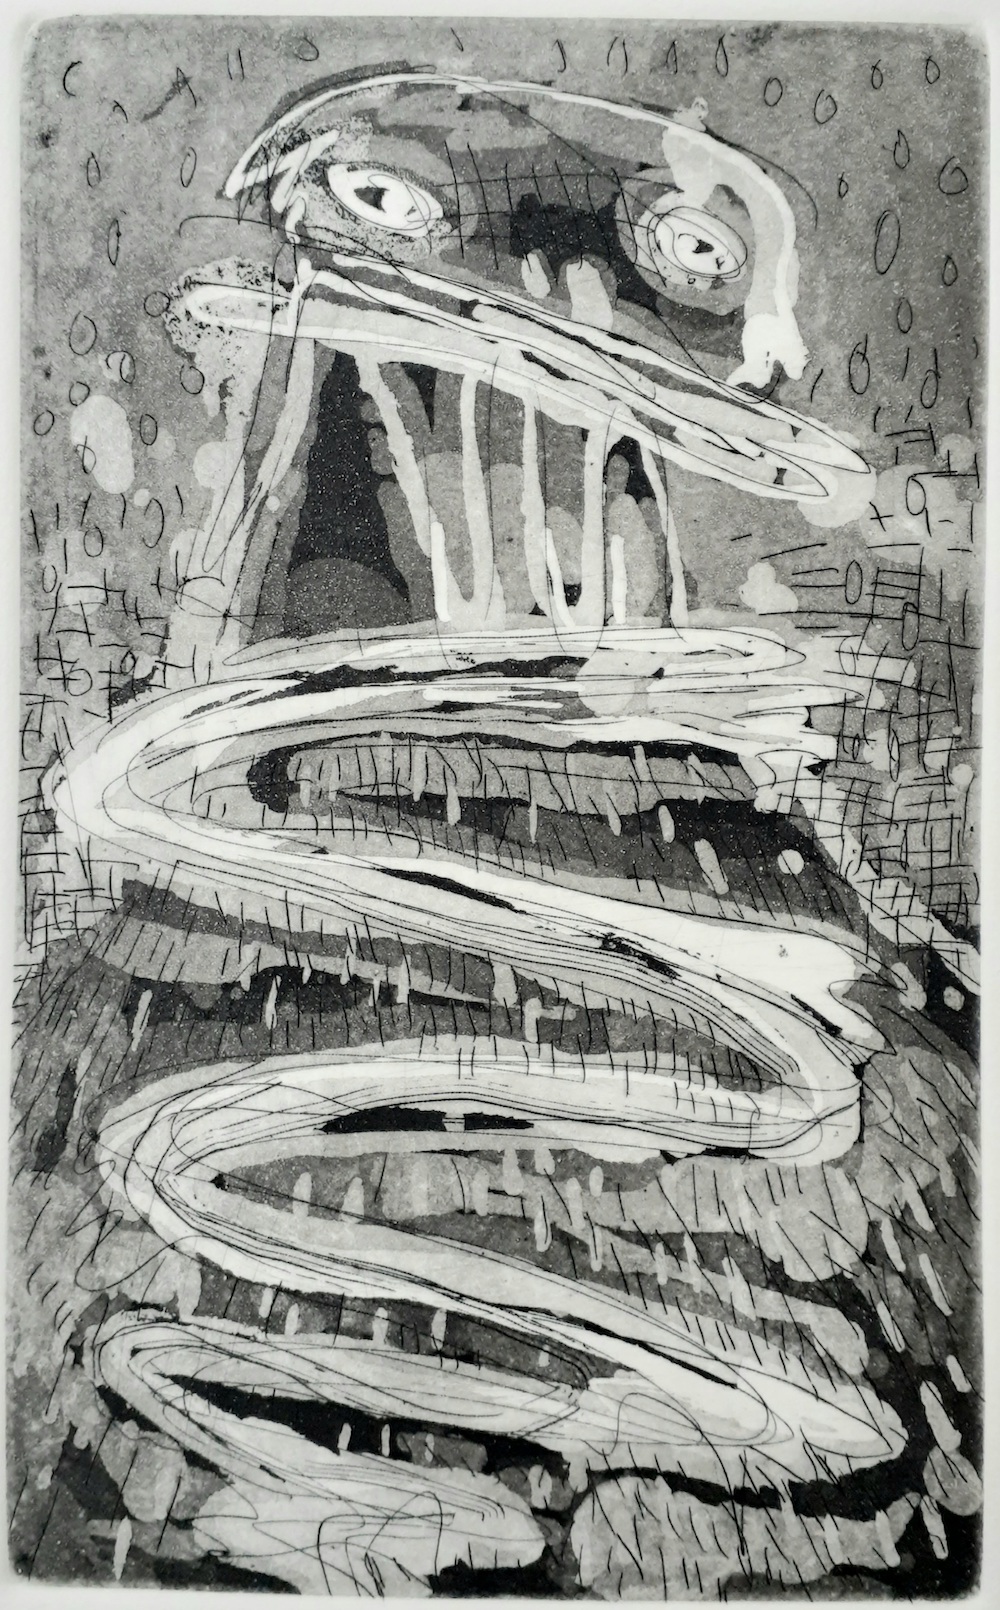 Gustavo Mora Perez, Sinuoso, Etching and aquatint, 8 7/8 in x 5 1/2 in, 2021